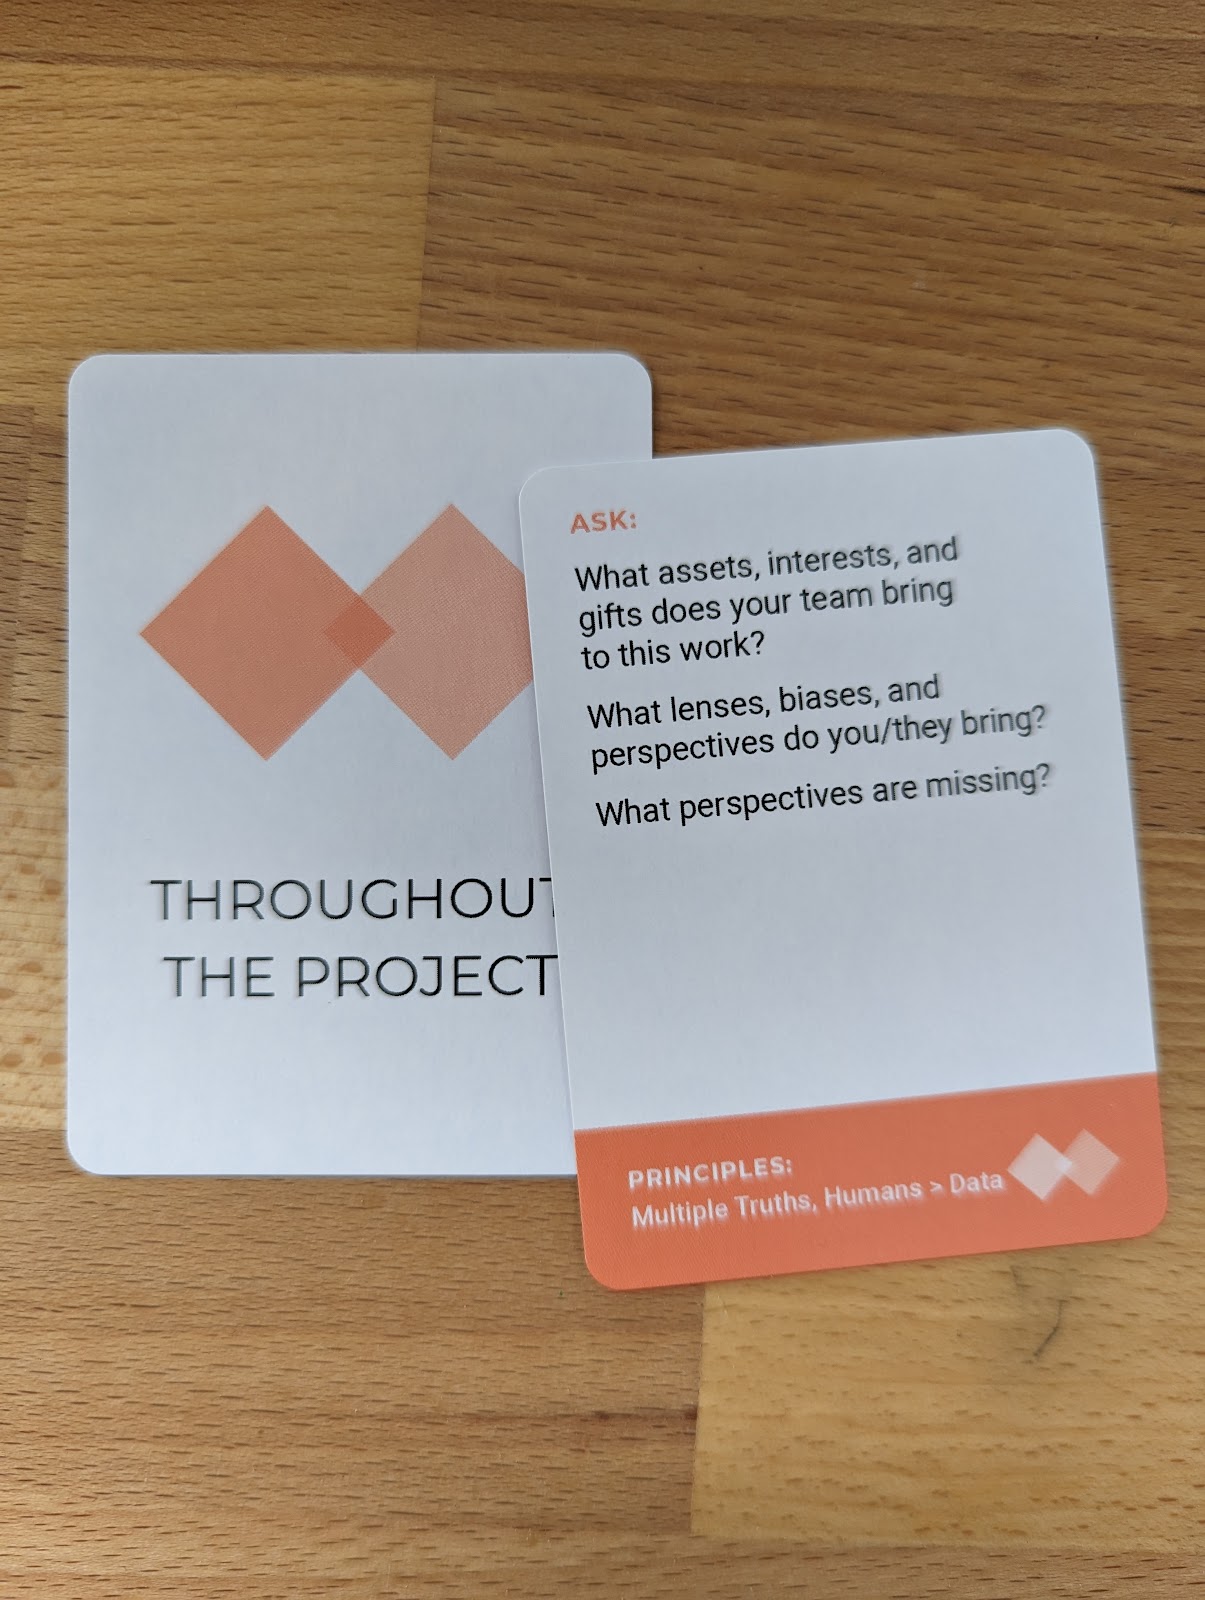 Image: A card from our data equity deck that poses a reflection question to be asked throughout the project: What assets, interests, and gifts does your team bring to this work? What lenses, biases, and perspectives do you/they bring? What perspectives are missing?